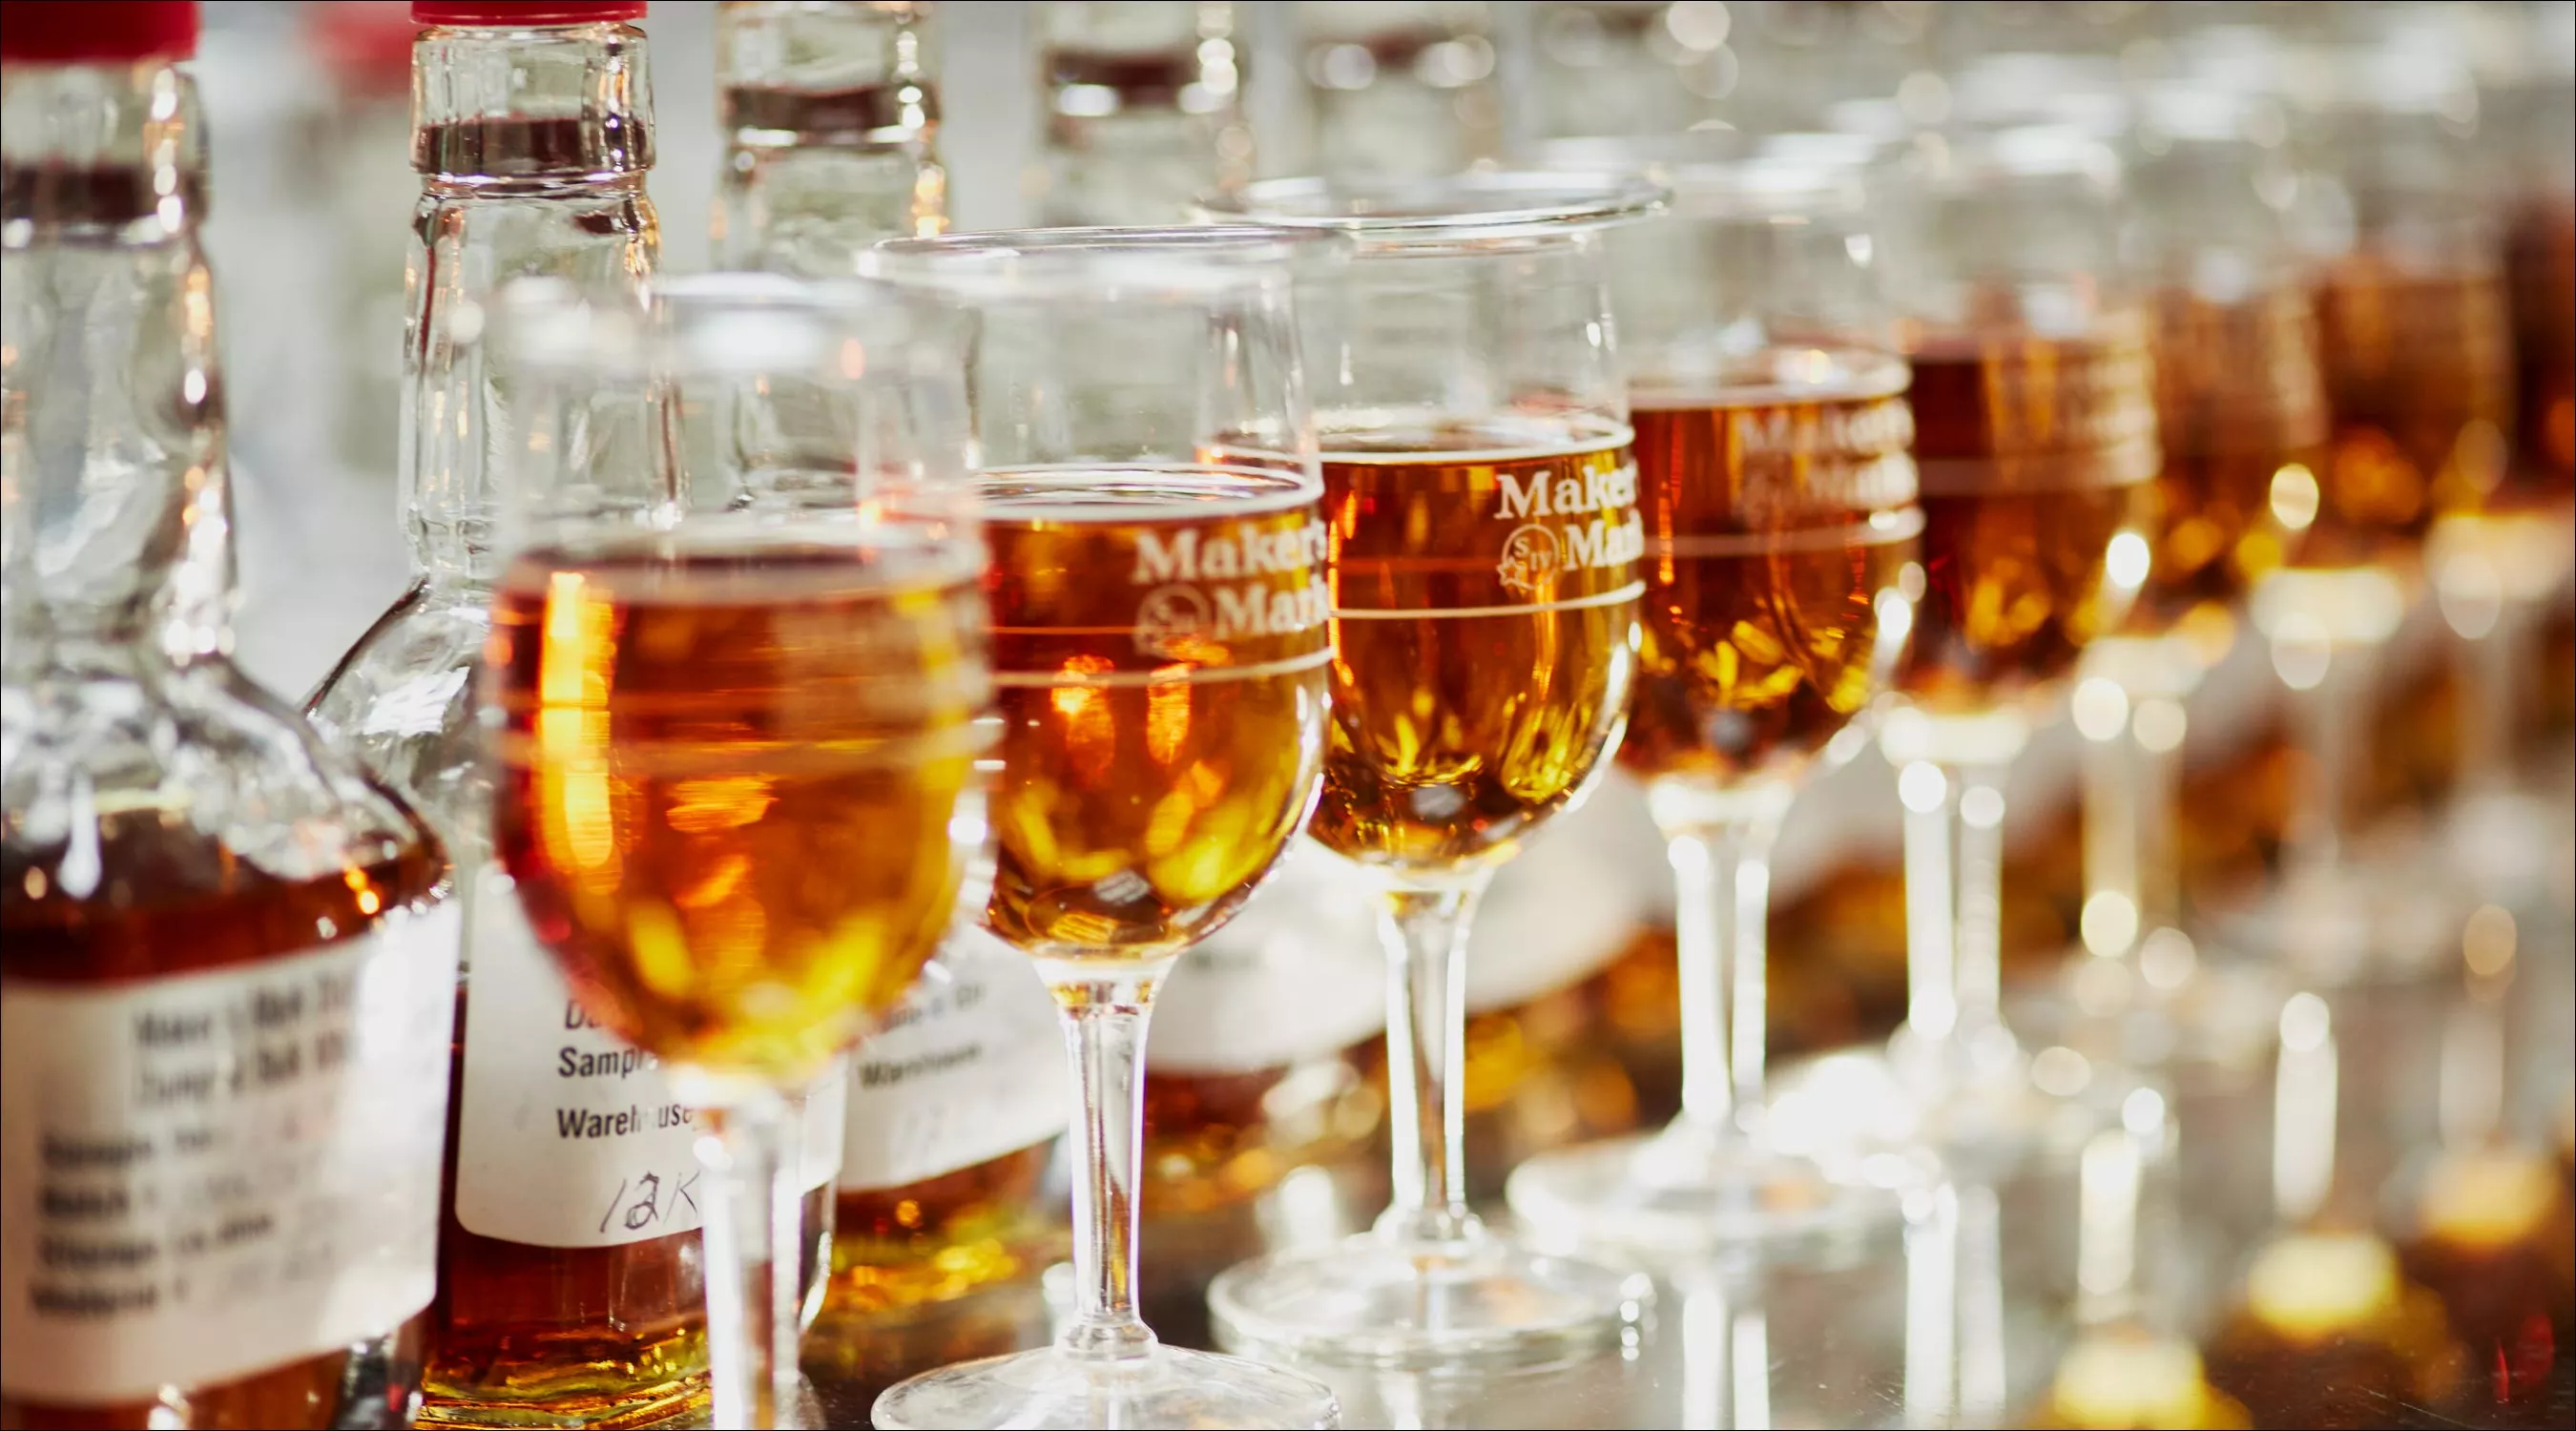 A row of glasses filled with Maker's Mark are presented in front of their bottles.